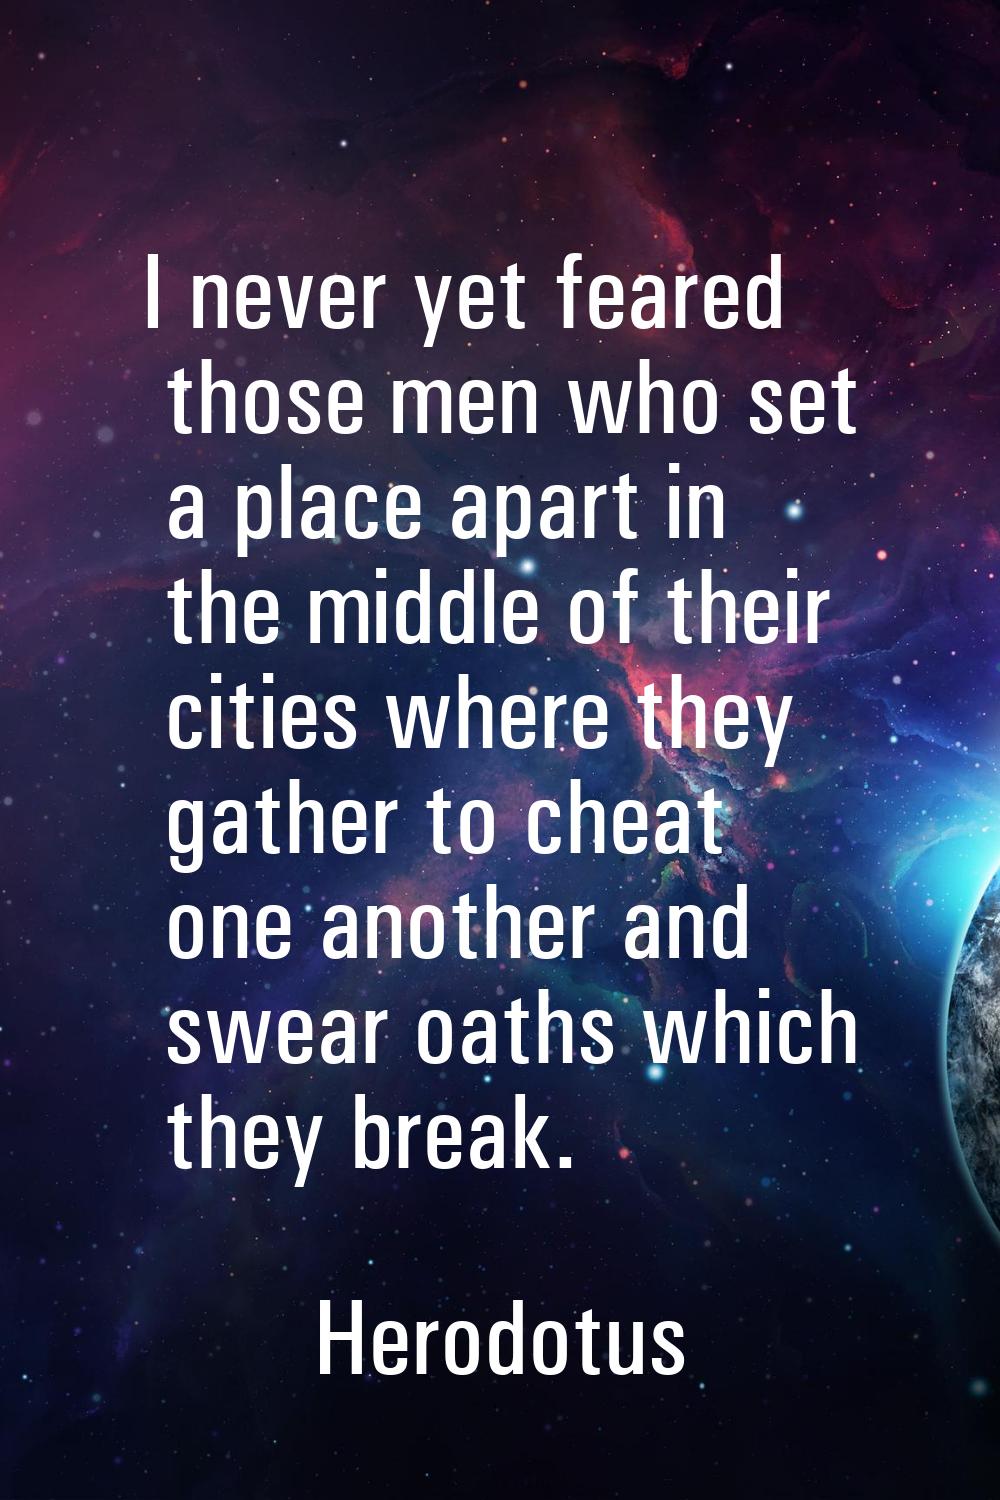 I never yet feared those men who set a place apart in the middle of their cities where they gather 